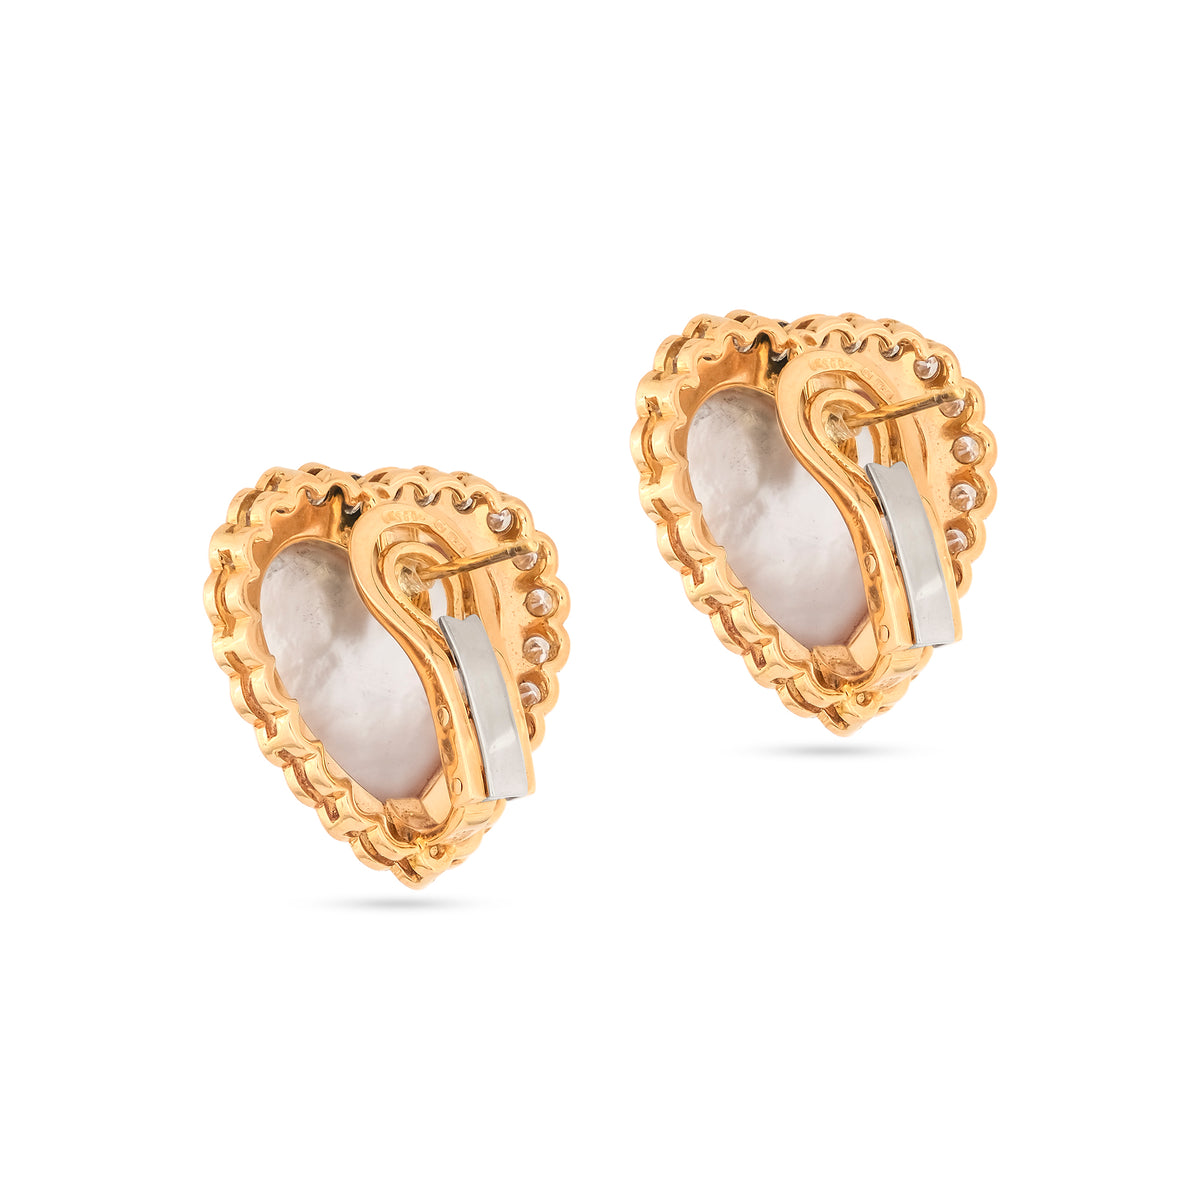 Boodles 18ct Yellow Gold Diamond and Pearl Earrings